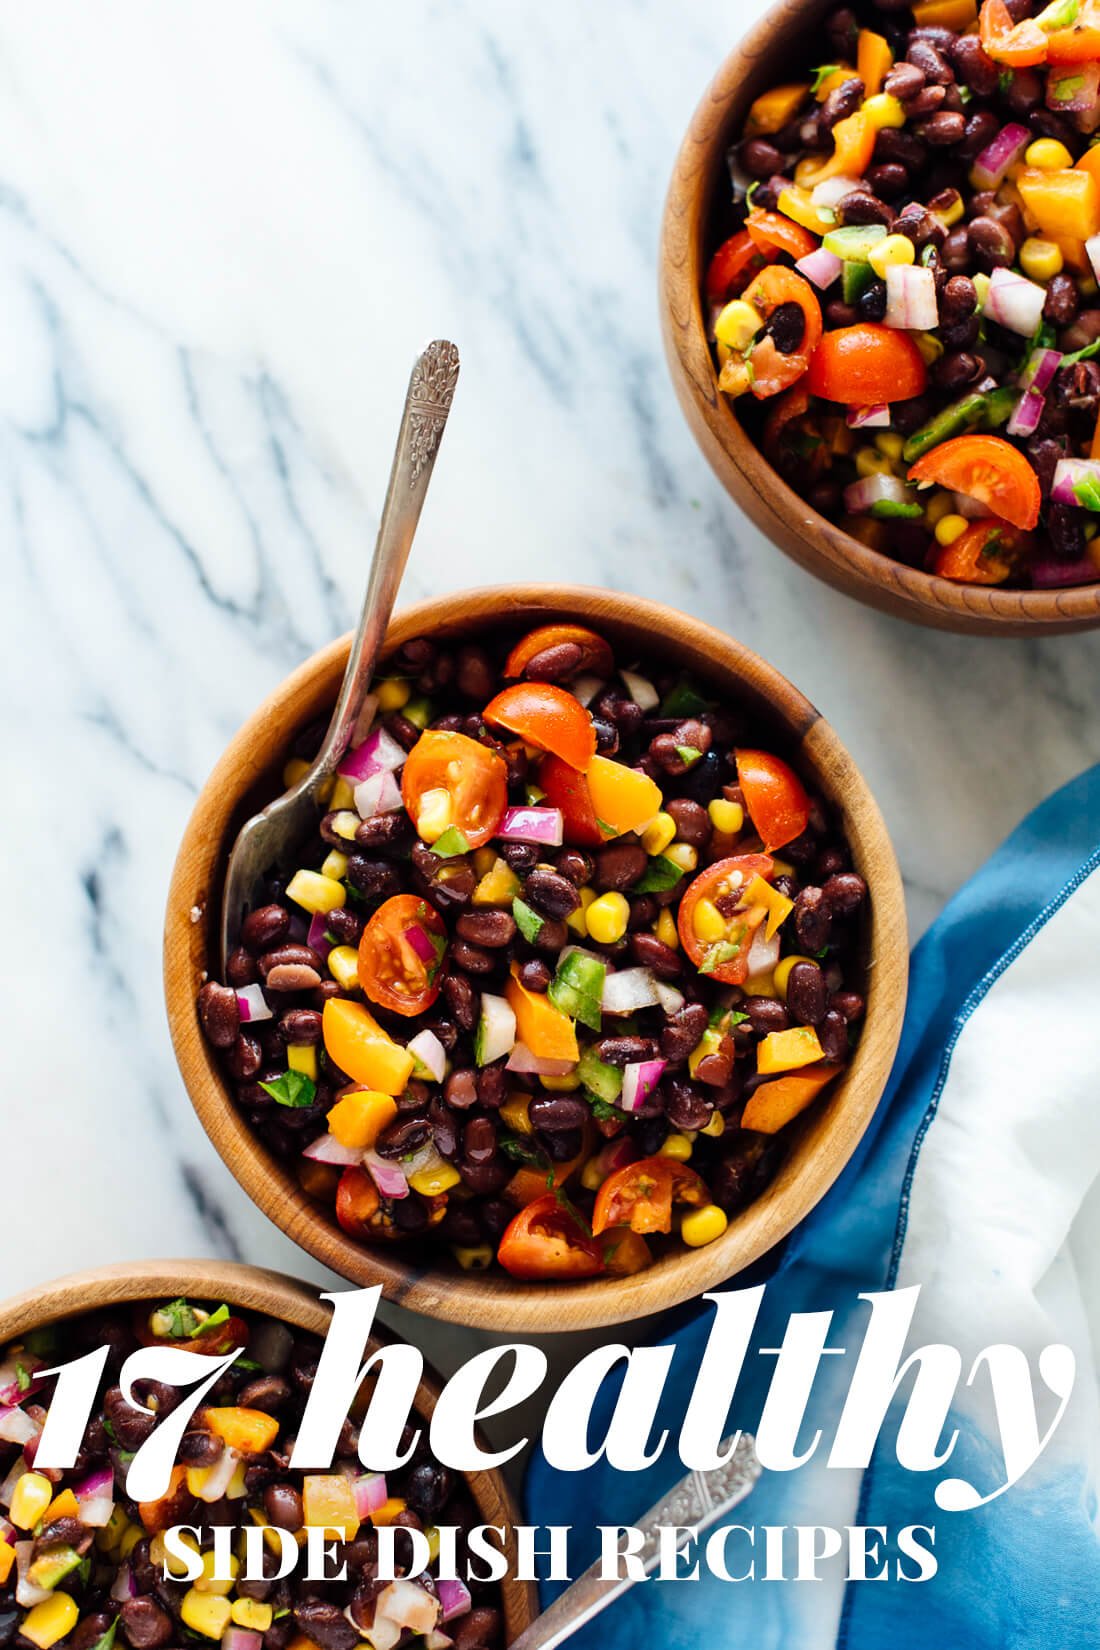 17 easy and healthy side dish recipes